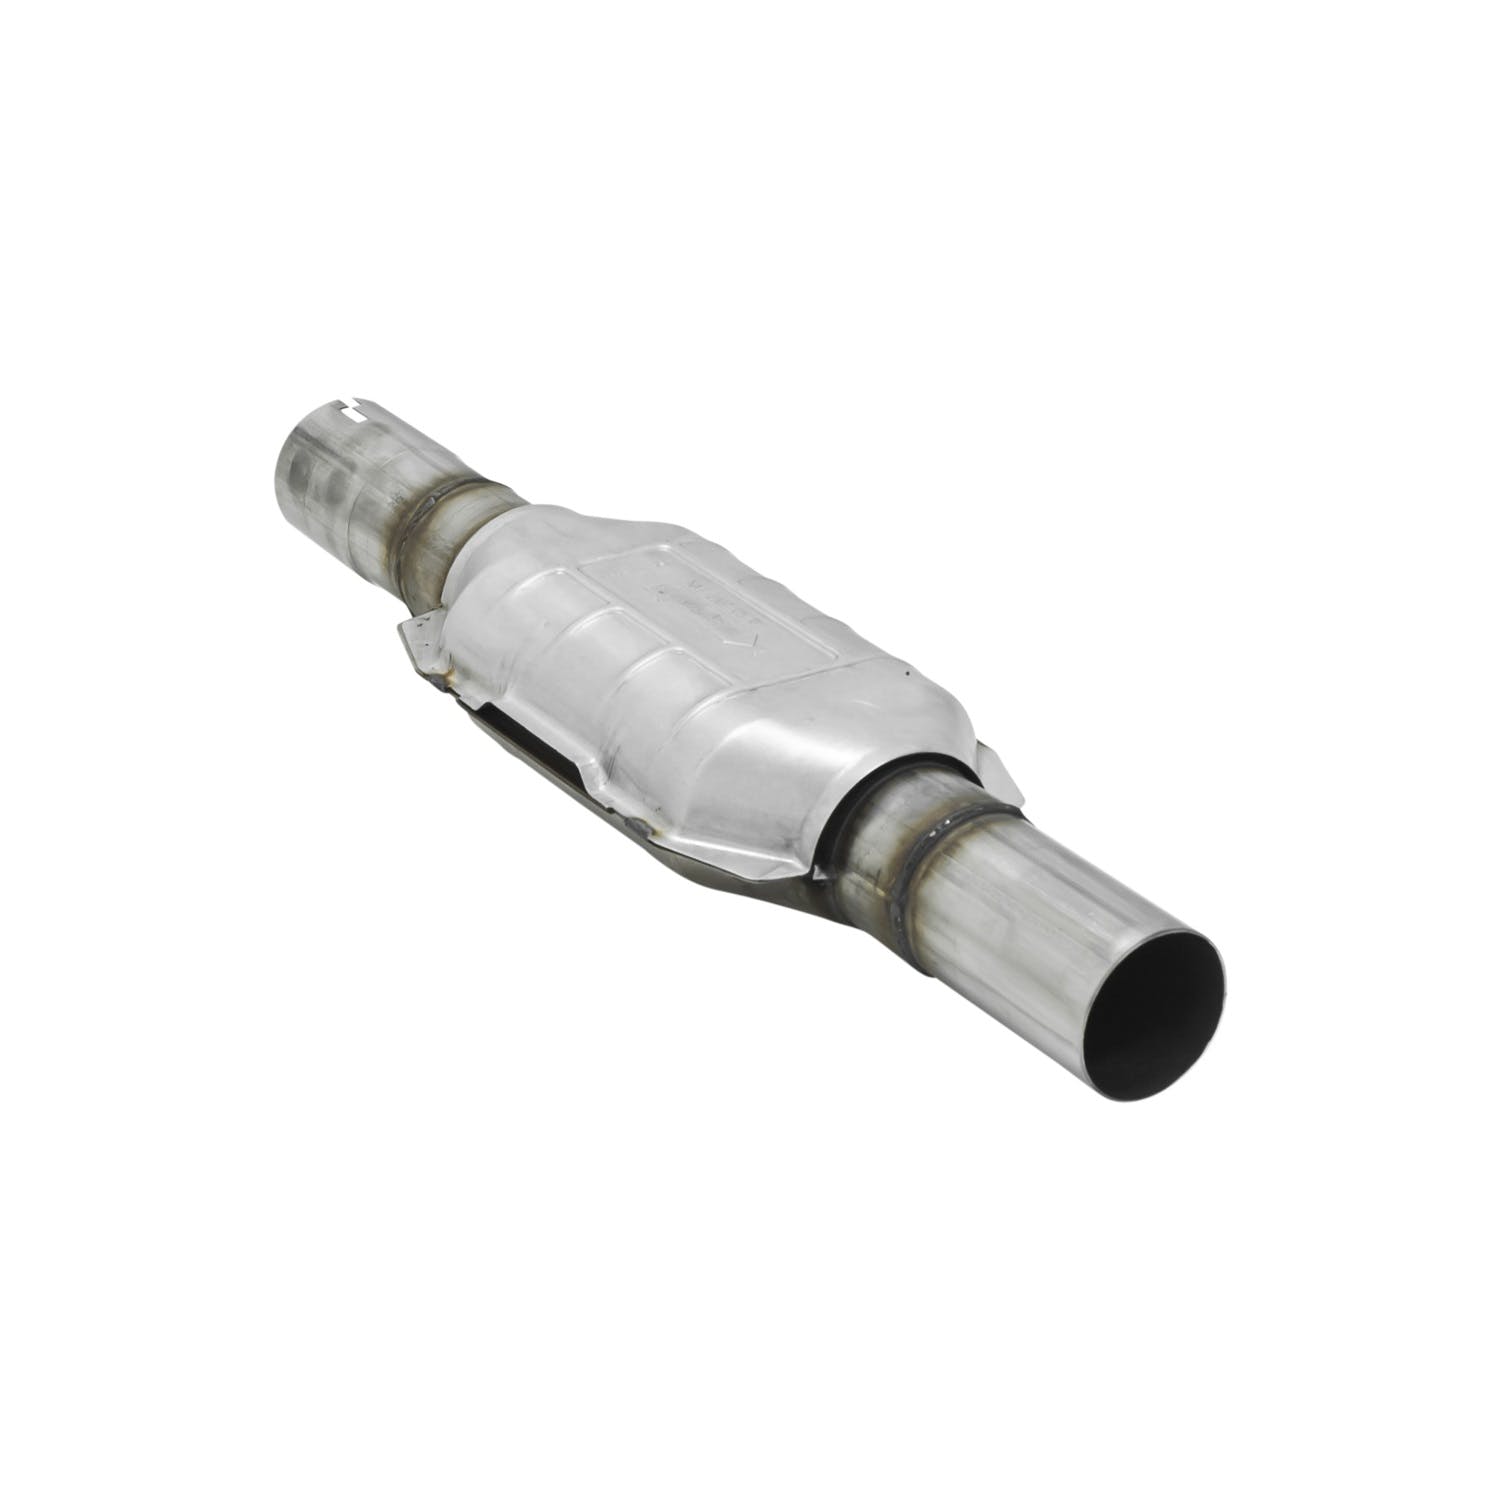 Flowmaster Catalytic Converters 2010025 Catalytic Converter-Direct Fit-3.00 in. Inlet/Outlet-49 State